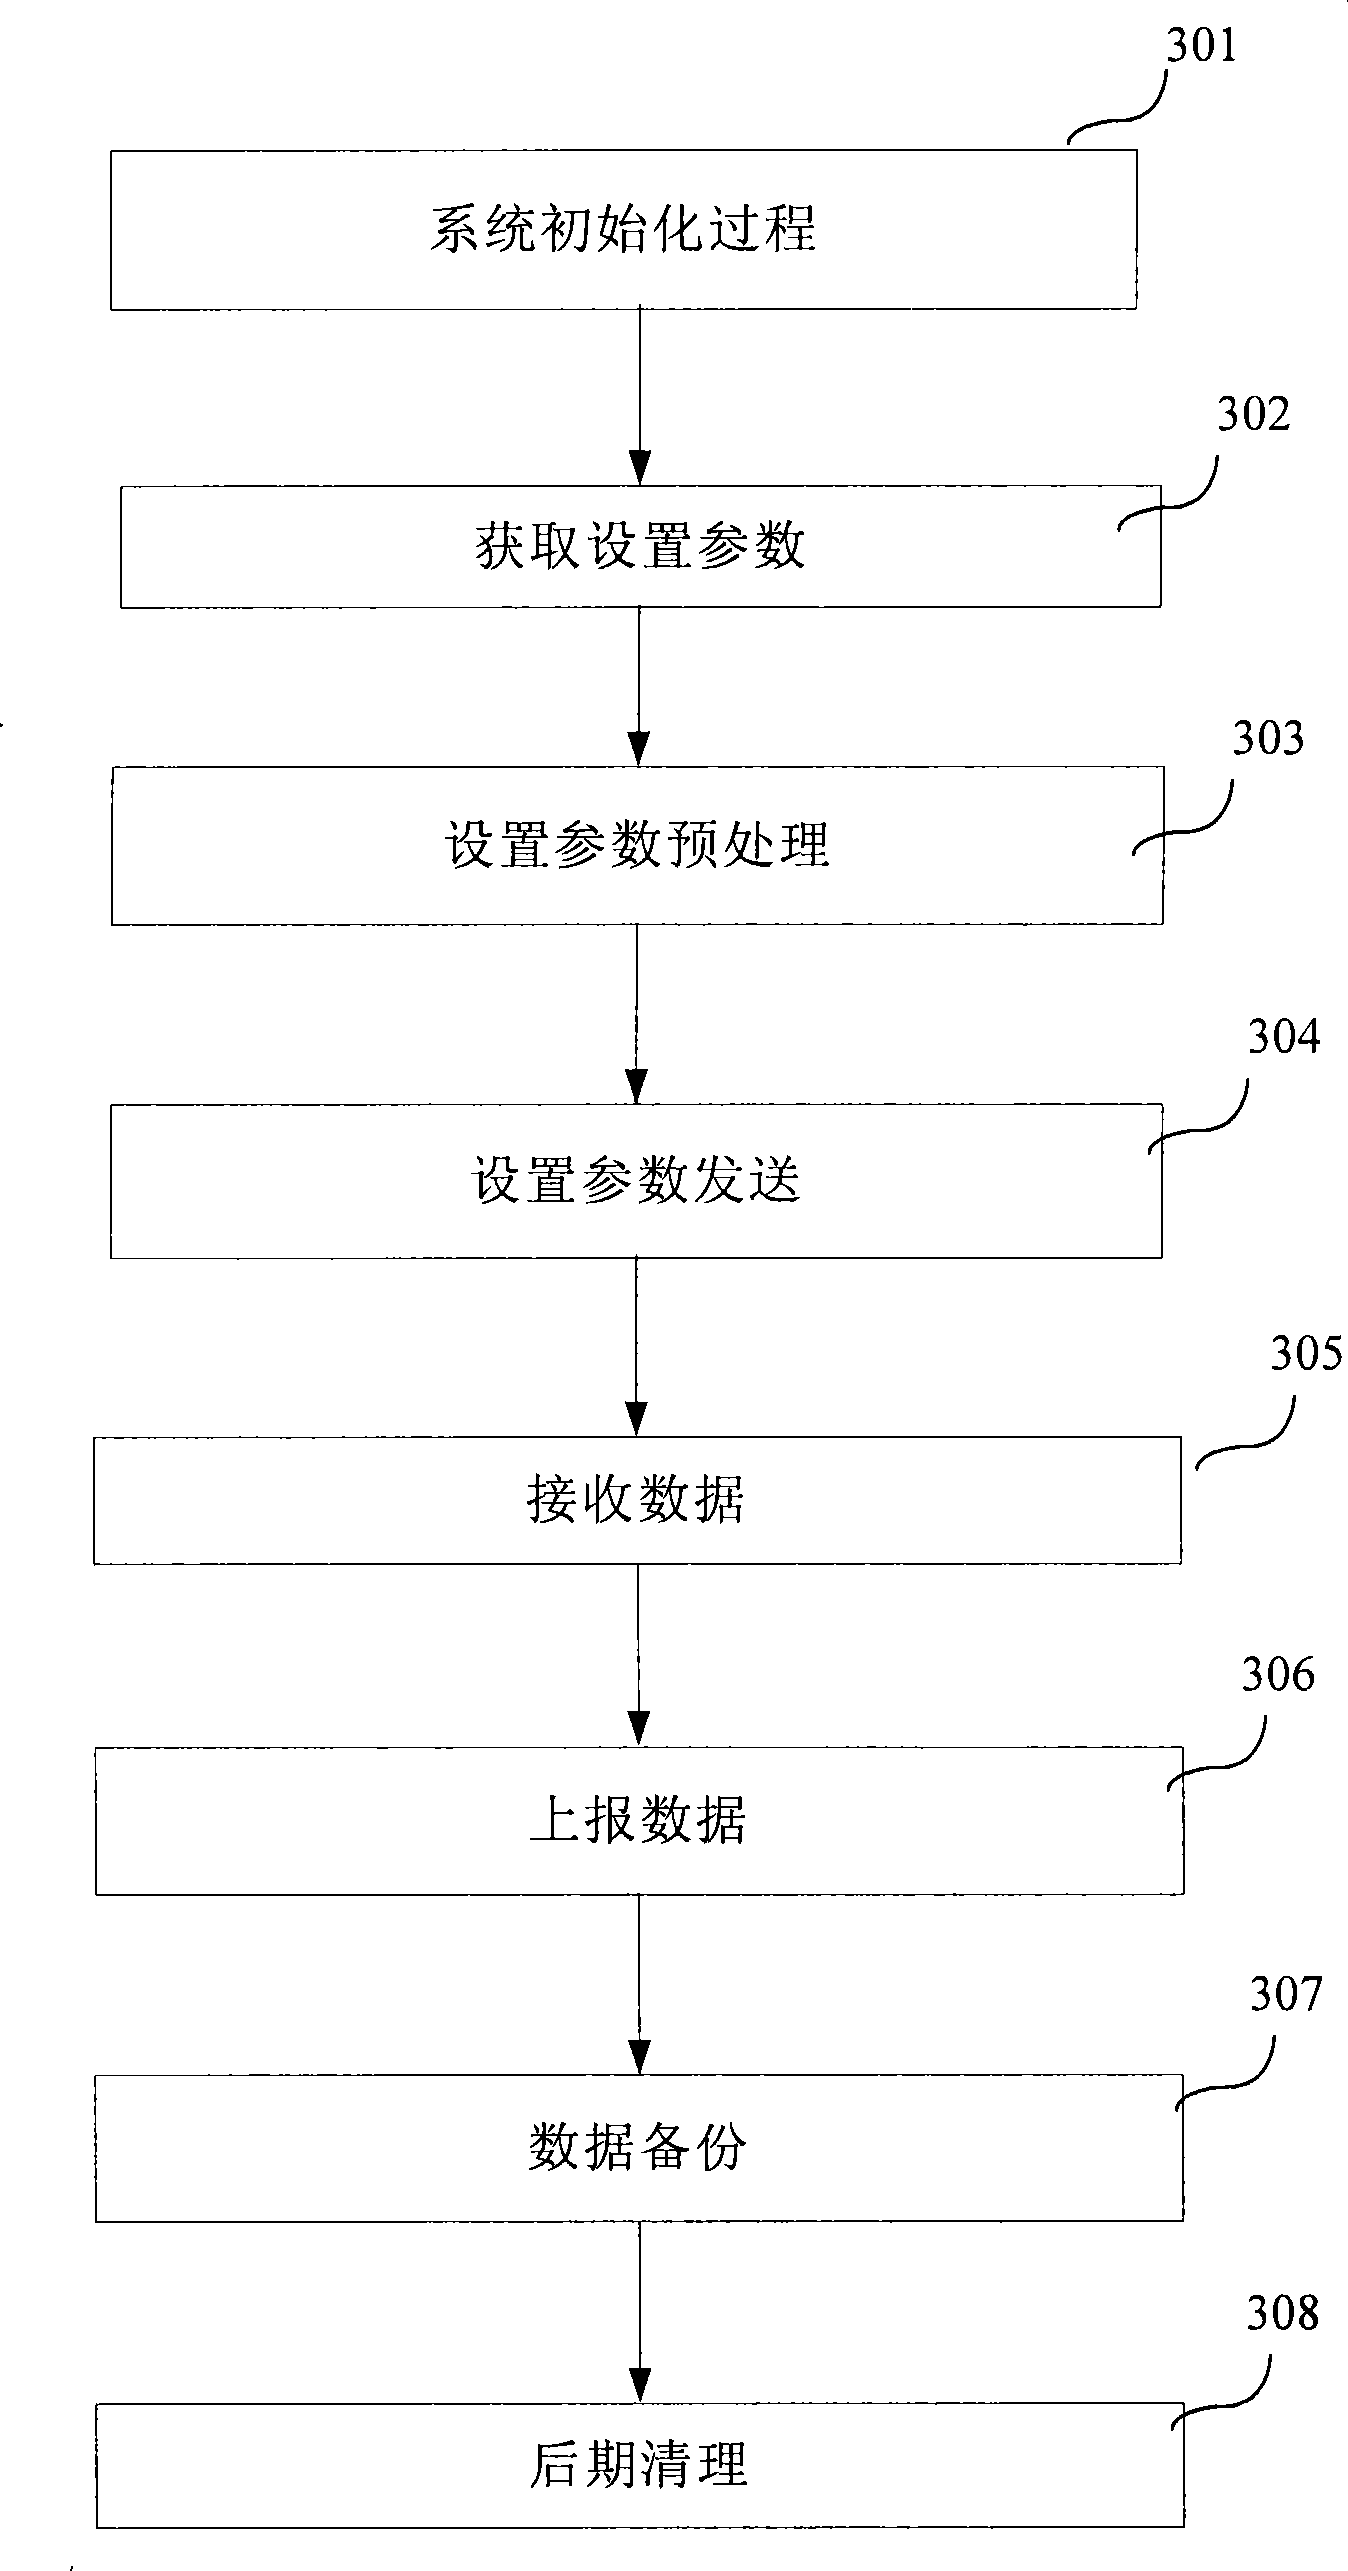 Data collection method used for remote wireless meter reading system